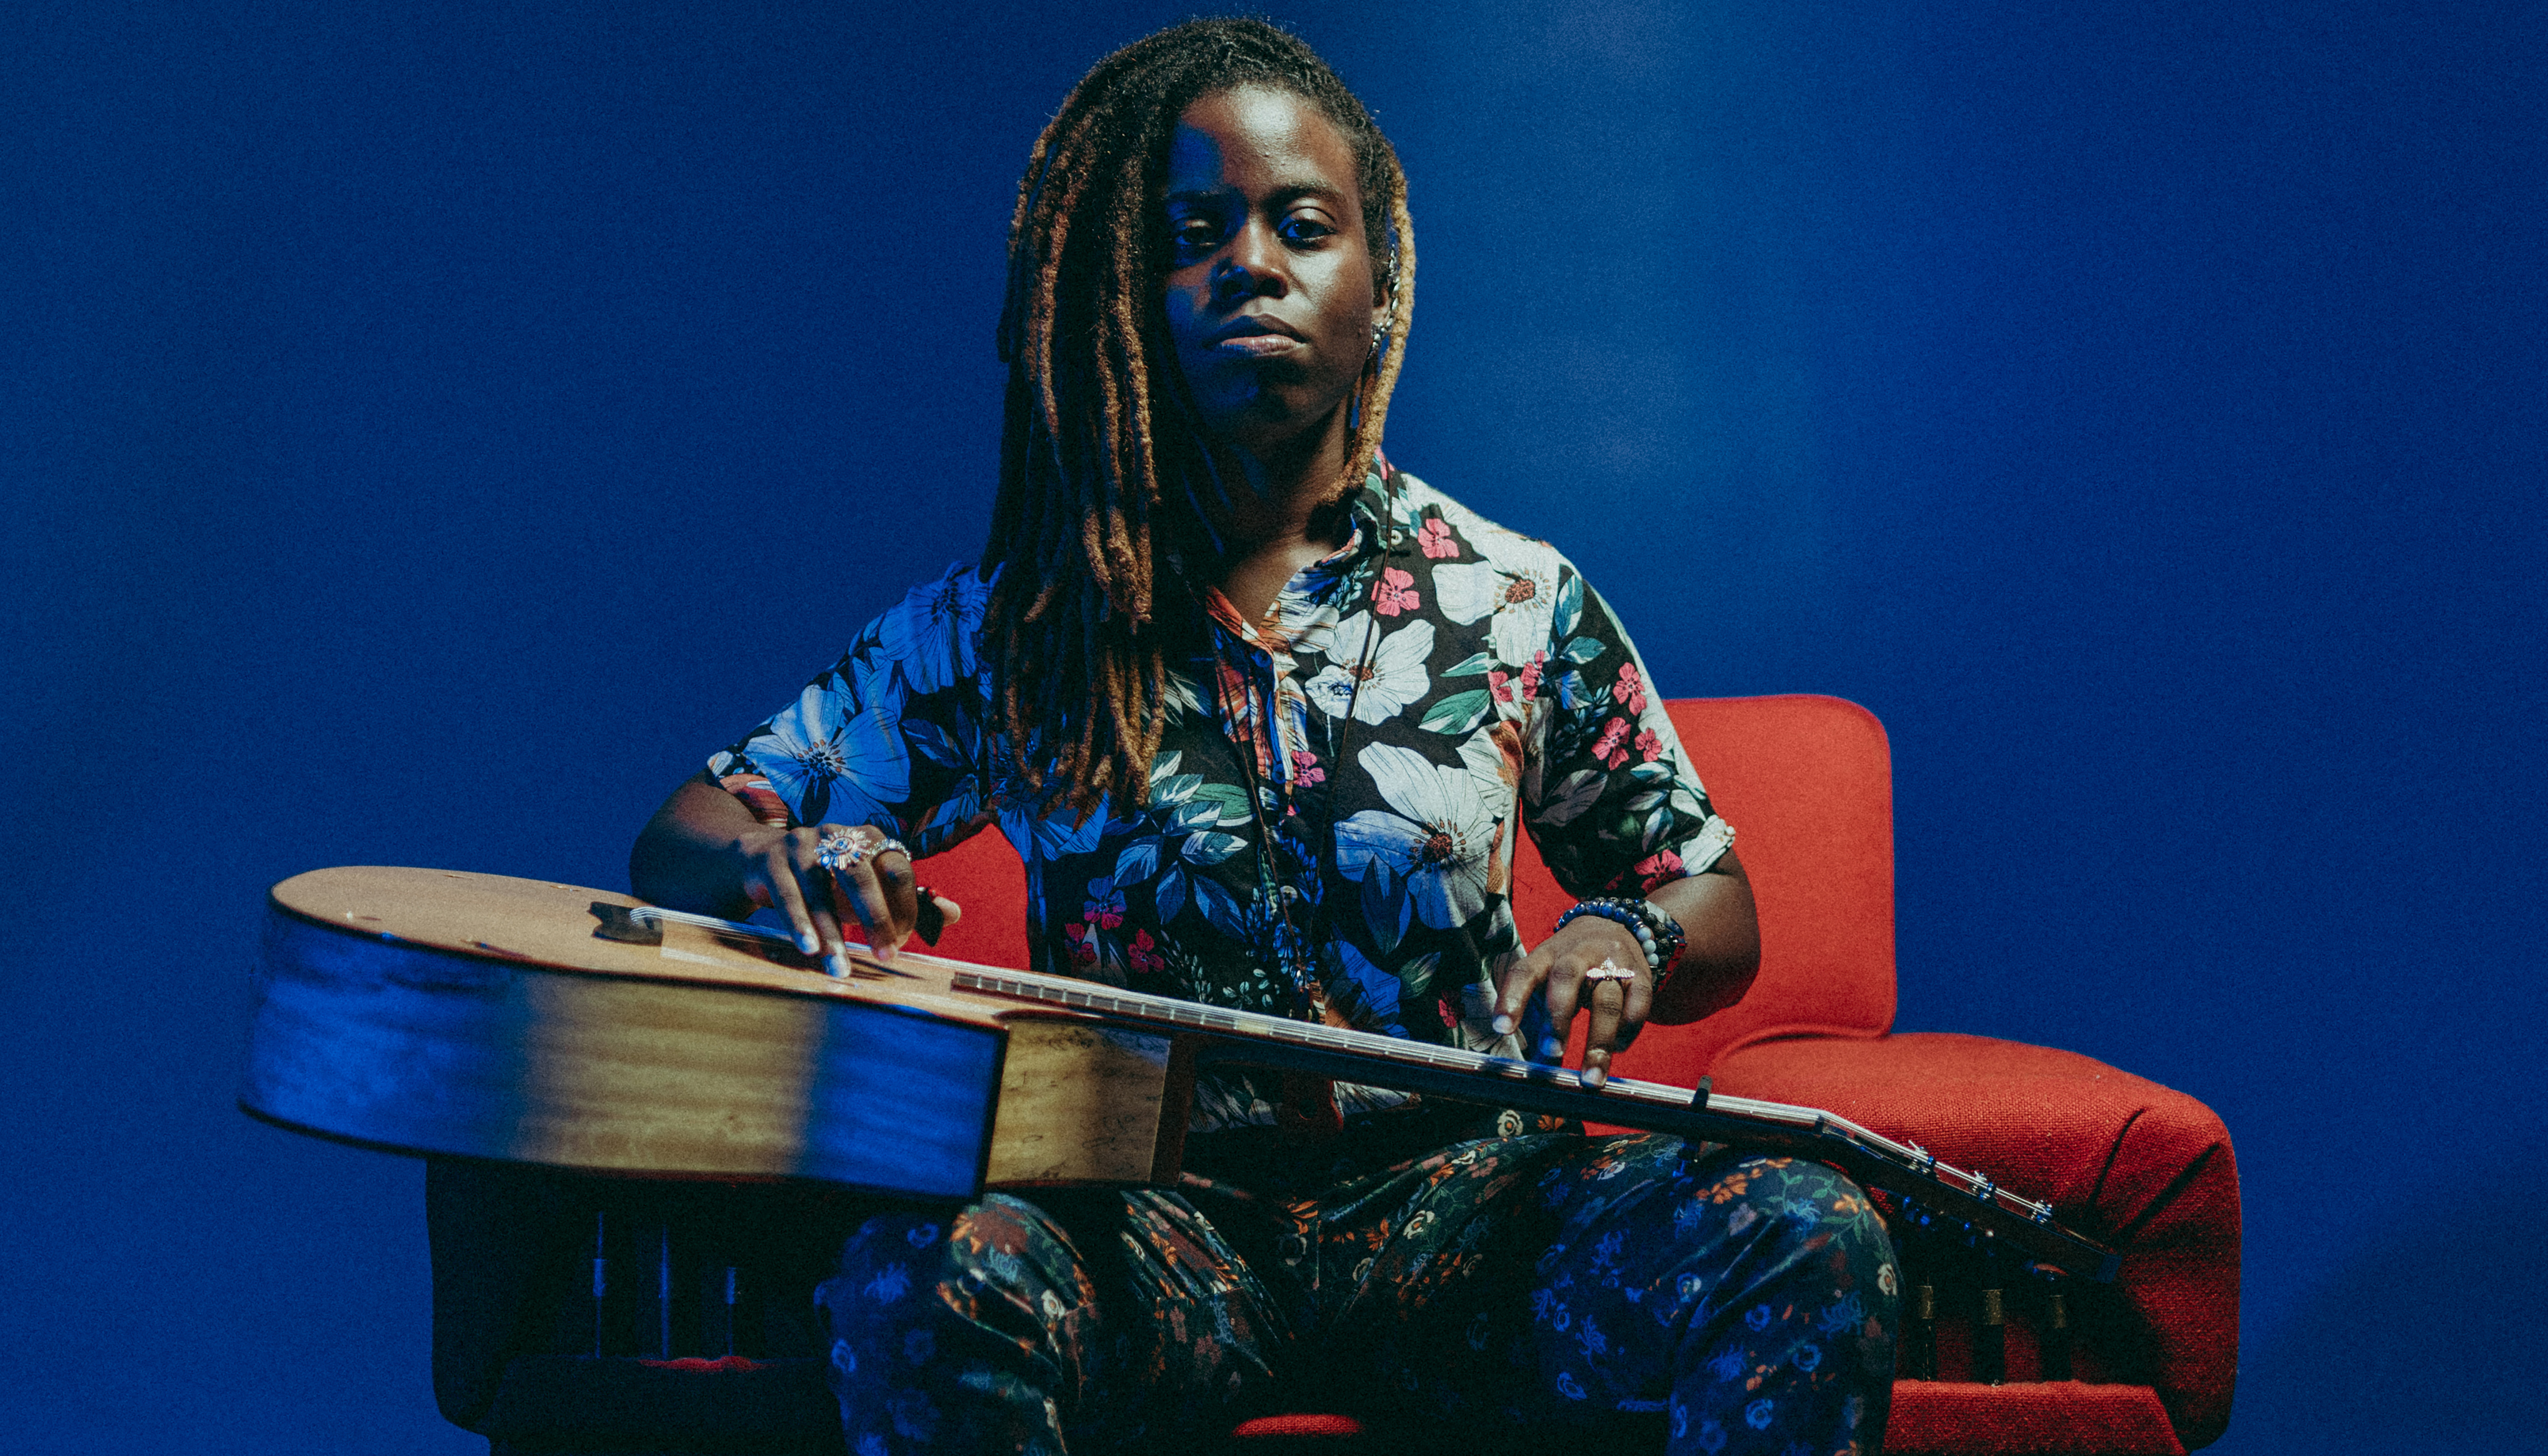 Musician with brown skin and ombre locs wears a floral-patterned outfit and sits on a red chair against a blue background with an acoustic guitar on her lap.